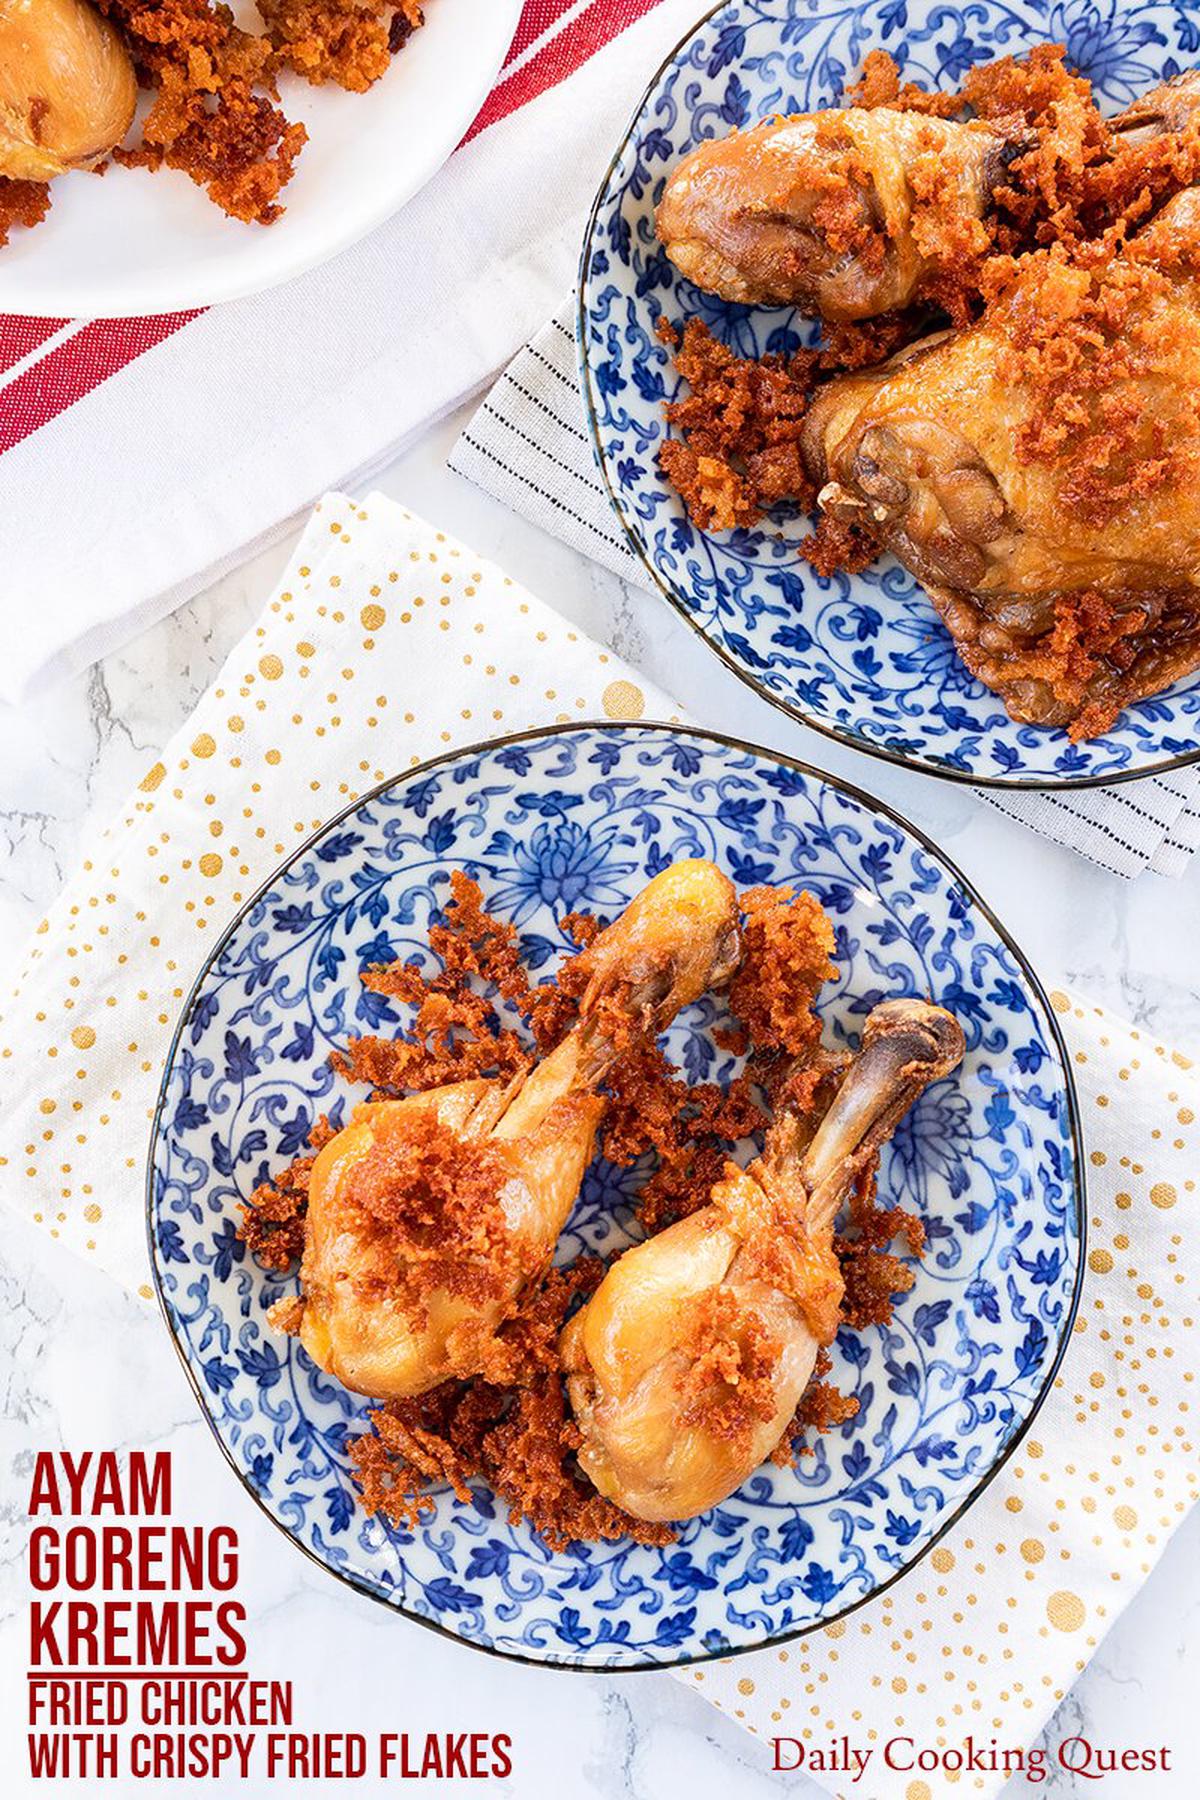 Ayam Goreng Kremes - Fried Chicken with Crispy Spiced Flakes.